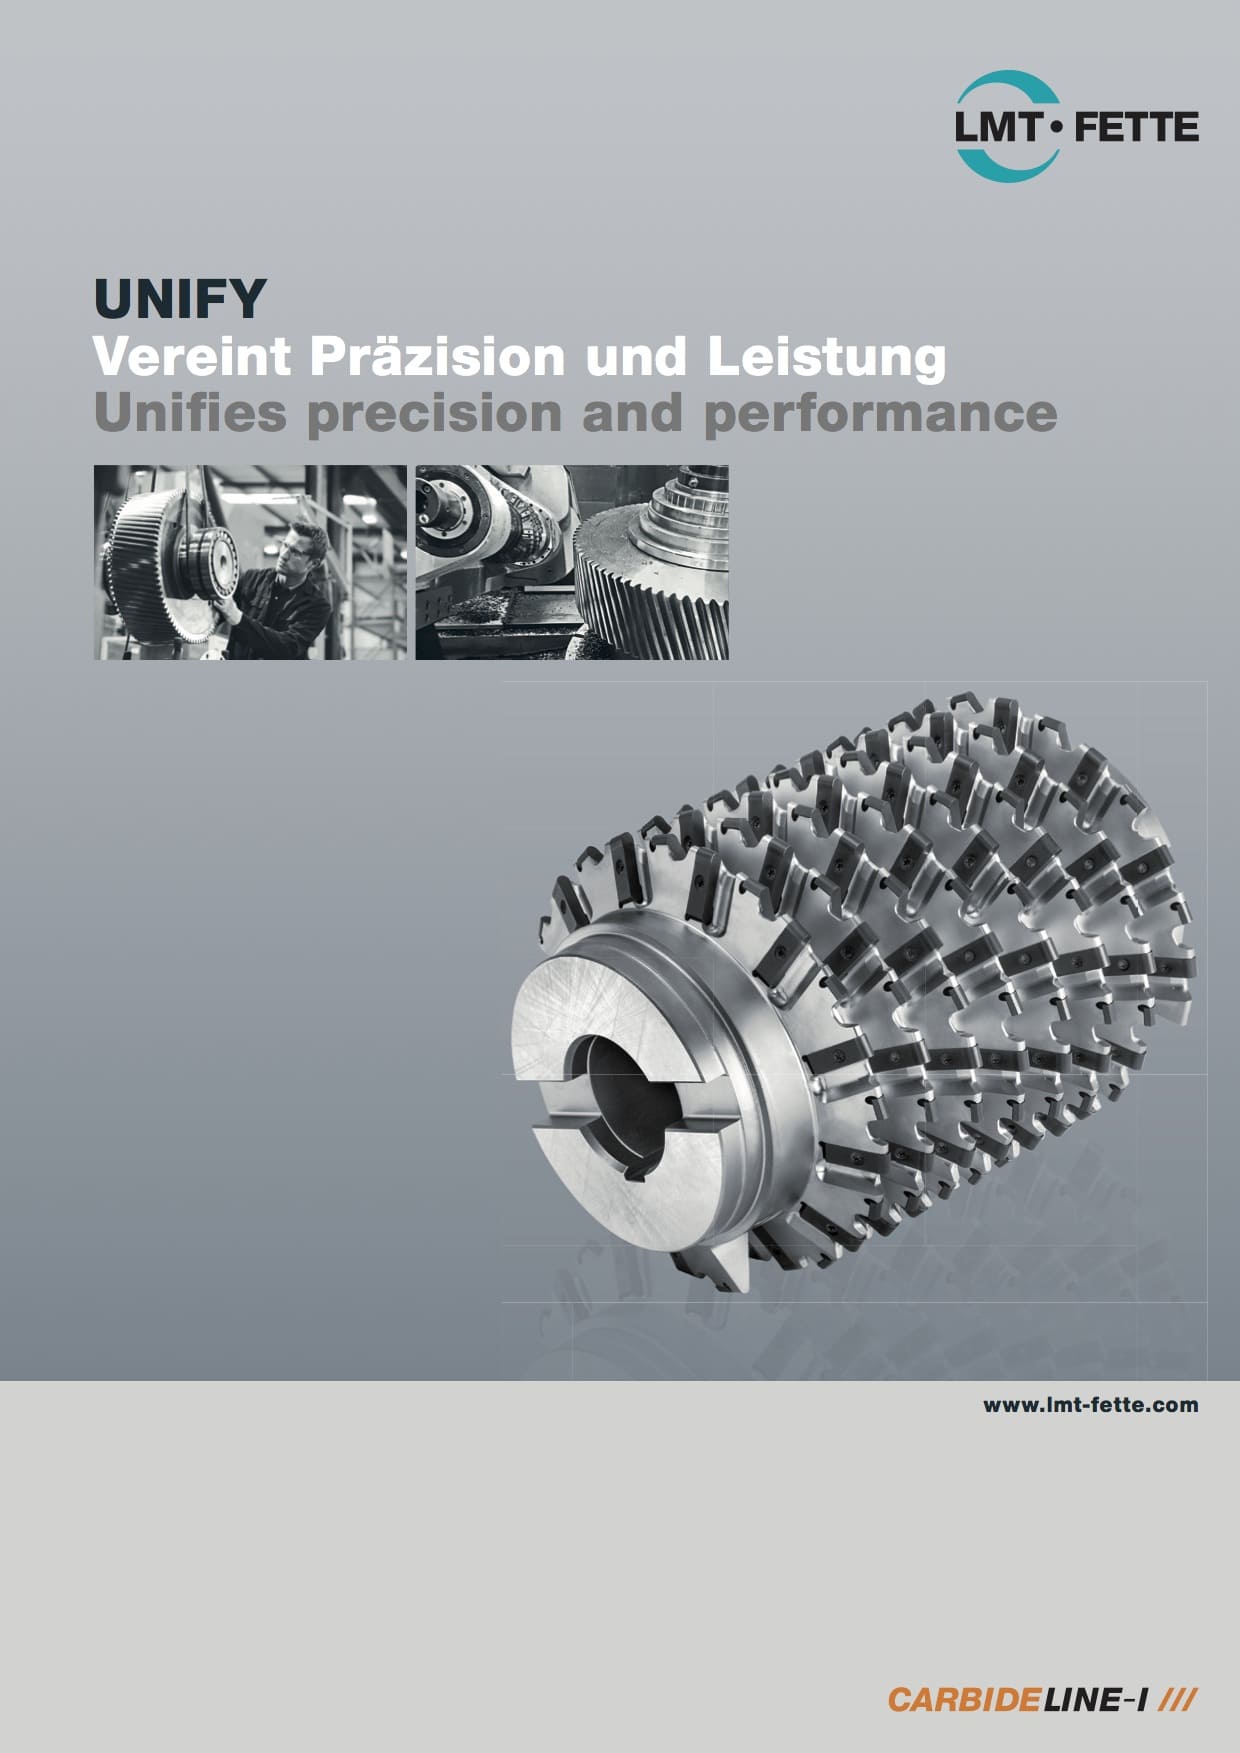 UNIFY - Unifies precision and performance